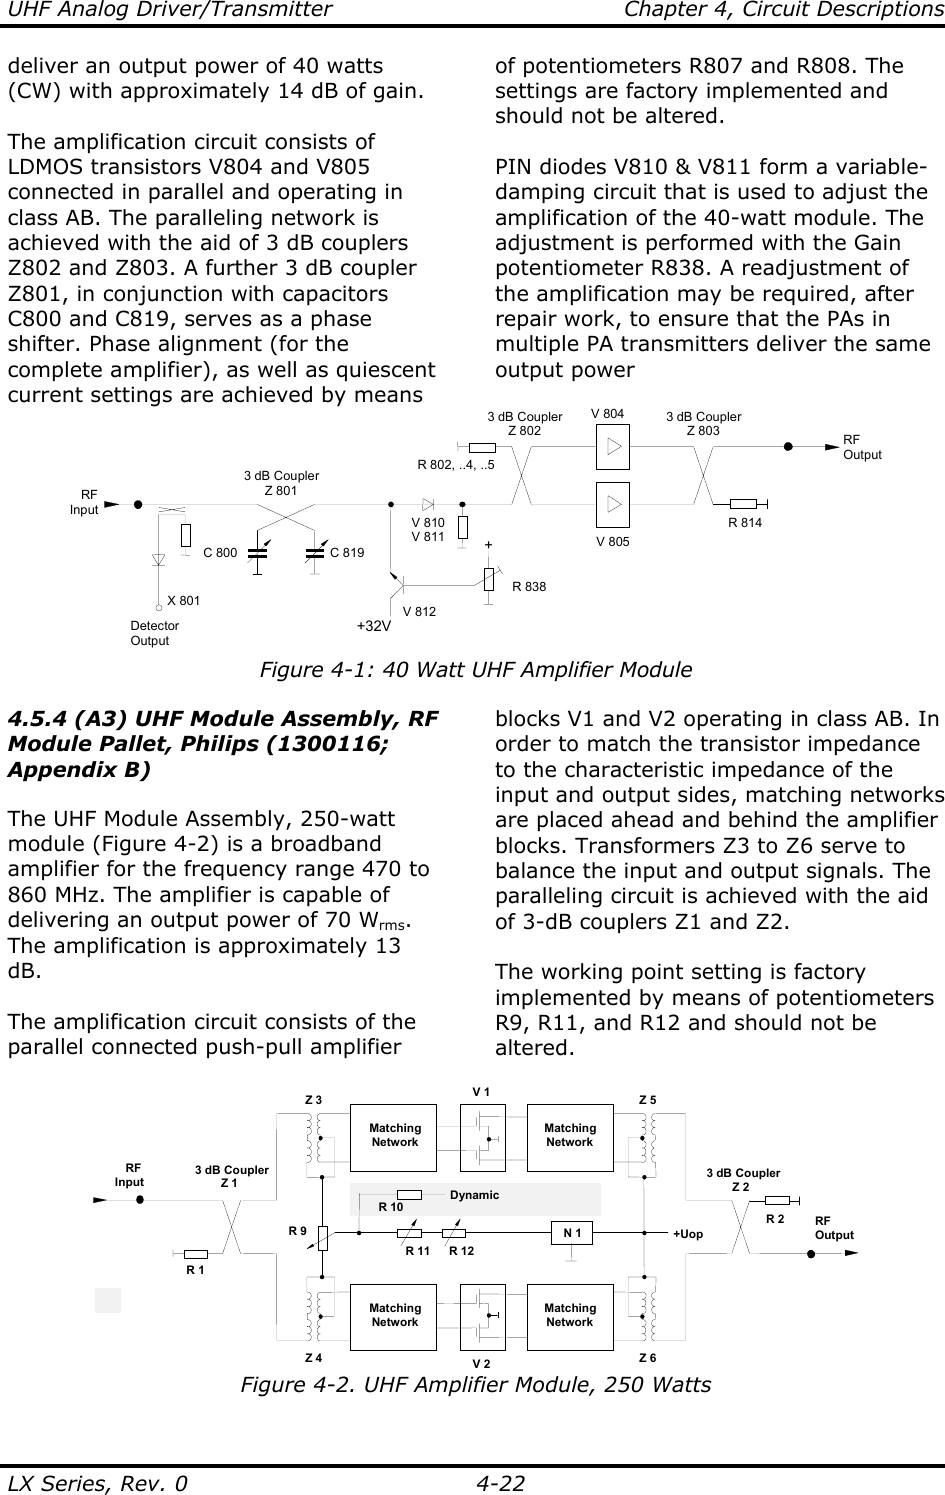 UHF Analog Driver/Transmitter    Chapter 4, Circuit Descriptions LX Series, Rev. 0    4-22 deliver an output power of 40 watts (CW) with approximately 14 dB of gain.  The amplification circuit consists of LDMOS transistors V804 and V805 connected in parallel and operating in class AB. The paralleling network is achieved with the aid of 3 dB couplers Z802 and Z803. A further 3 dB coupler Z801, in conjunction with capacitors C800 and C819, serves as a phase shifter. Phase alignment (for the complete amplifier), as well as quiescent current settings are achieved by means of potentiometers R807 and R808. The settings are factory implemented and should not be altered.  PIN diodes V810 &amp; V811 form a variable-damping circuit that is used to adjust the amplification of the 40-watt module. The adjustment is performed with the Gain potentiometer R838. A readjustment of the amplification may be required, after repair work, to ensure that the PAs in multiple PA transmitters deliver the same output power V 805V 8043 dB CouplerZ 801RFOutputRFInputR 814R 802, ..4, ..5C 800 C 819DetectorOutputX 801+32V+R 838V 810V 811V 8123 dB CouplerZ 8023 dB CouplerZ 803 Figure 4-1: 40 Watt UHF Amplifier Module  4.5.4 (A3) UHF Module Assembly, RF Module Pallet, Philips (1300116; Appendix B)  The UHF Module Assembly, 250-watt module (Figure 4-2) is a broadband amplifier for the frequency range 470 to 860 MHz. The amplifier is capable of delivering an output power of 70 Wrms. The amplification is approximately 13 dB.  The amplification circuit consists of the parallel connected push-pull amplifier   blocks V1 and V2 operating in class AB. In order to match the transistor impedance to the characteristic impedance of the input and output sides, matching networks are placed ahead and behind the amplifier blocks. Transformers Z3 to Z6 serve to balance the input and output signals. The paralleling circuit is achieved with the aid of 3-dB couplers Z1 and Z2.  The working point setting is factory implemented by means of potentiometers R9, R11, and R12 and should not be altered.  V 13 dB CouplerZ 2RFOutputRFInput3 dB CouplerZ 1R 2R 1MatchingNetworkMatchingNetworkV 2MatchingNetworkMatchingNetworkZ 3 Z 5Z 4 Z 6+UopN 1R 11 R 12R 9R 10Dynamic Figure 4-2. UHF Amplifier Module, 250 Watts 